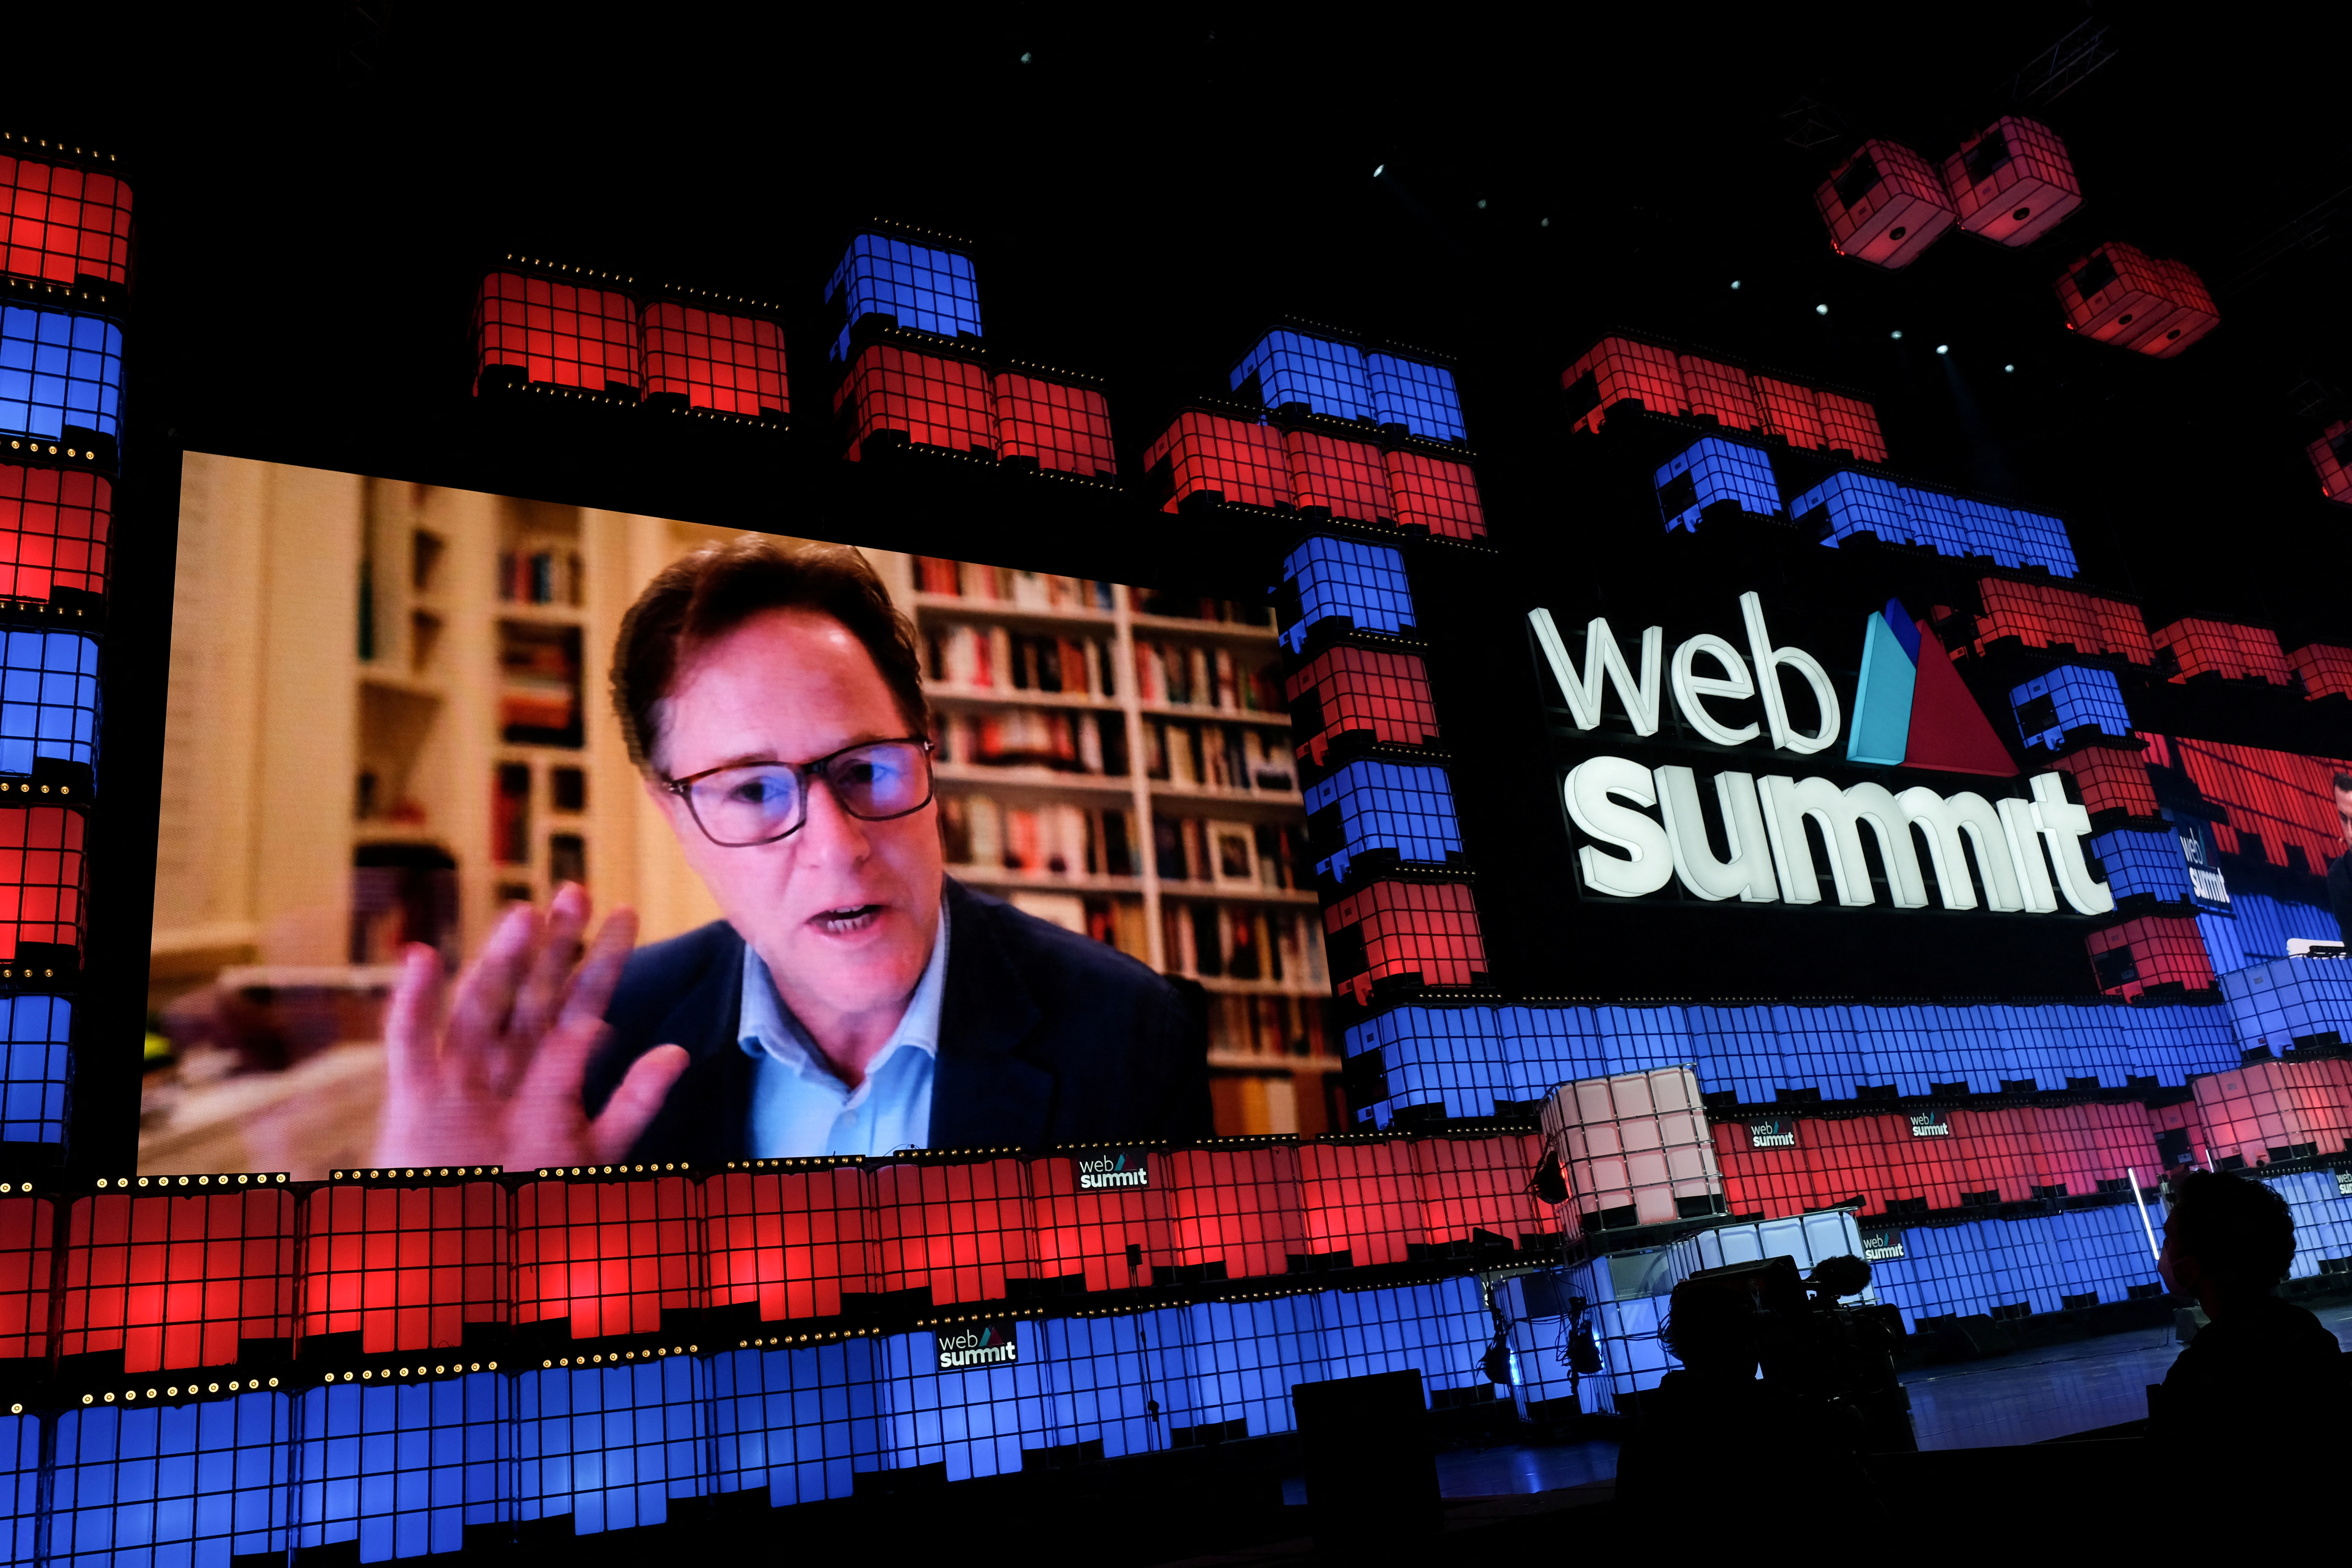 Nick Clegg, VP of Global Affairs & Communications at Meta (Facebook) participates remotely in the Web Summit, in Lisbon